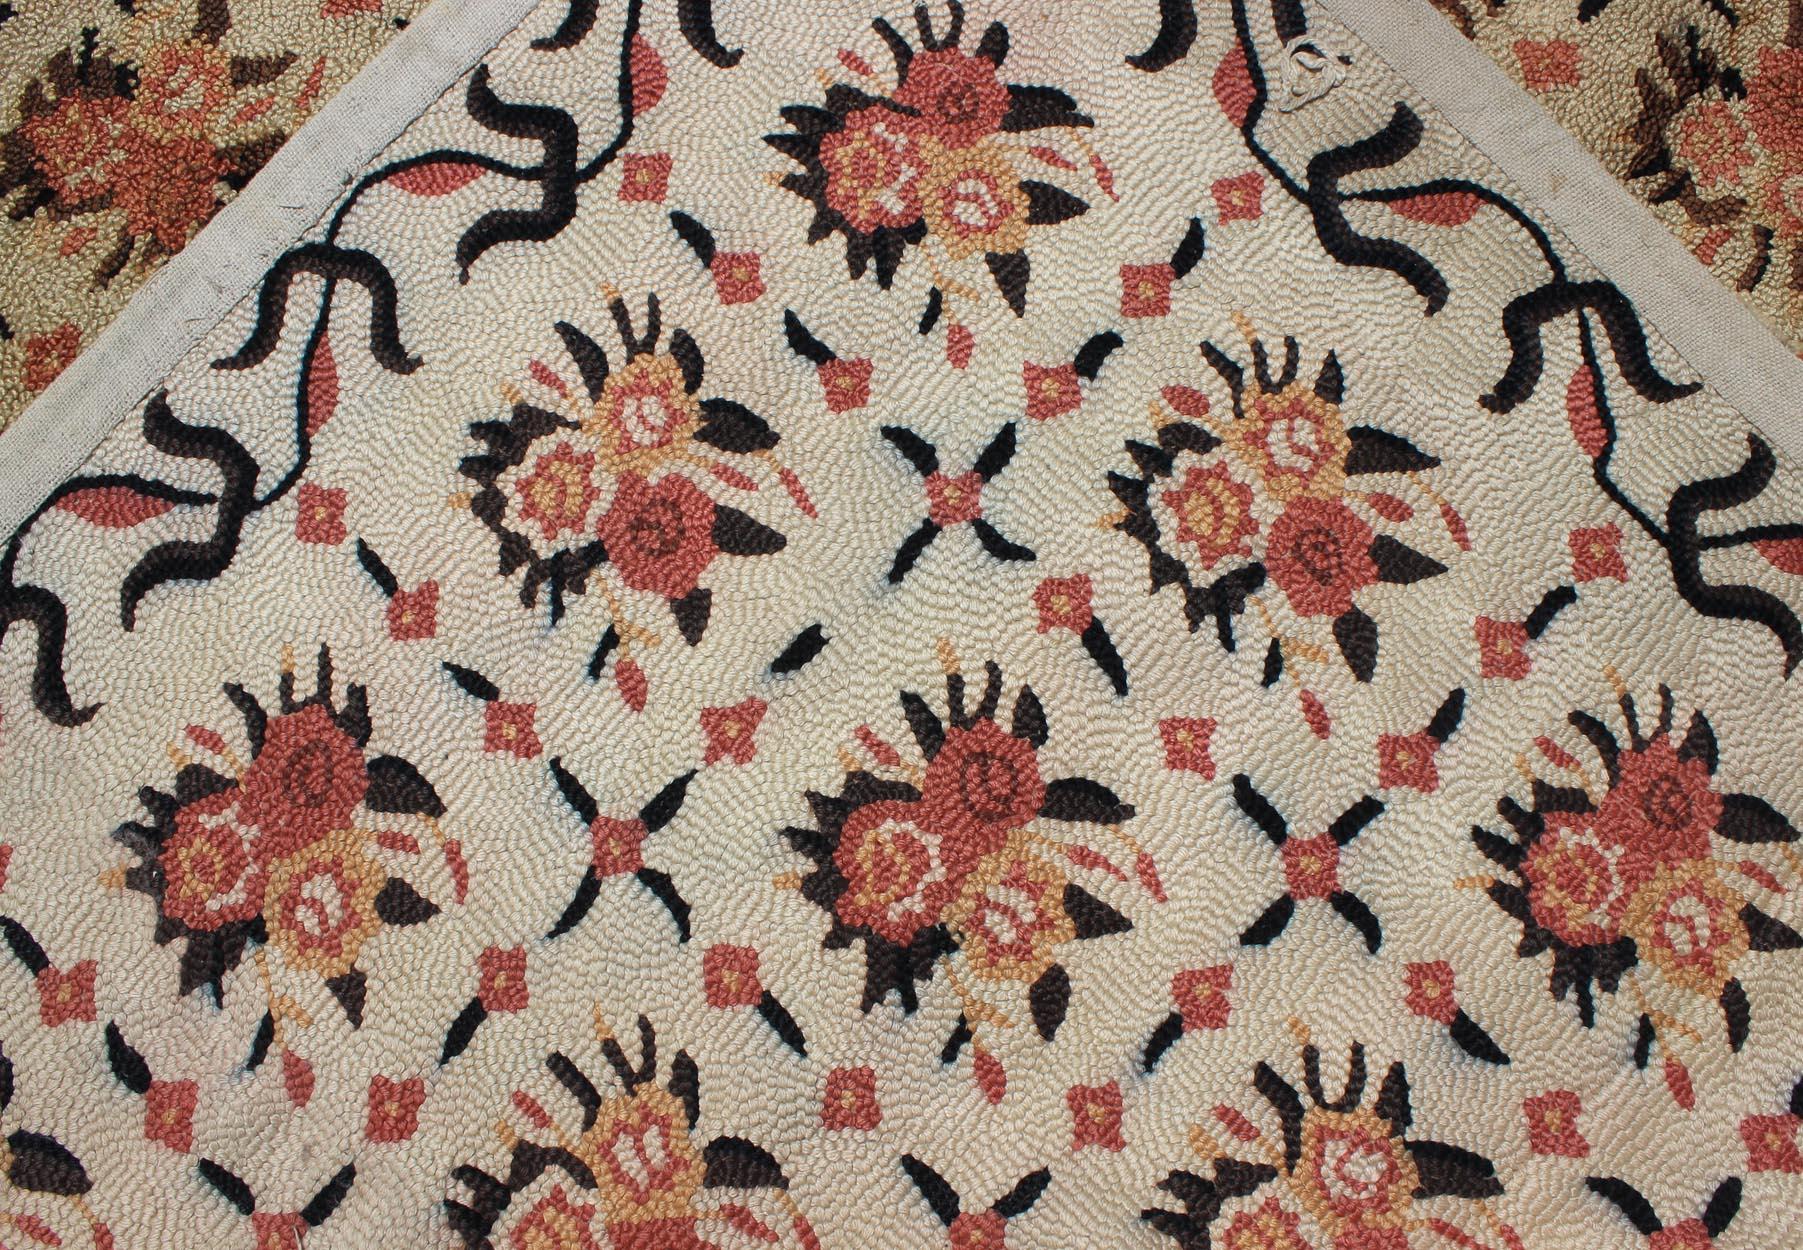 Vintage American Hooked Rug with All-Over Checkered Pattern of Floral Bouquets 6